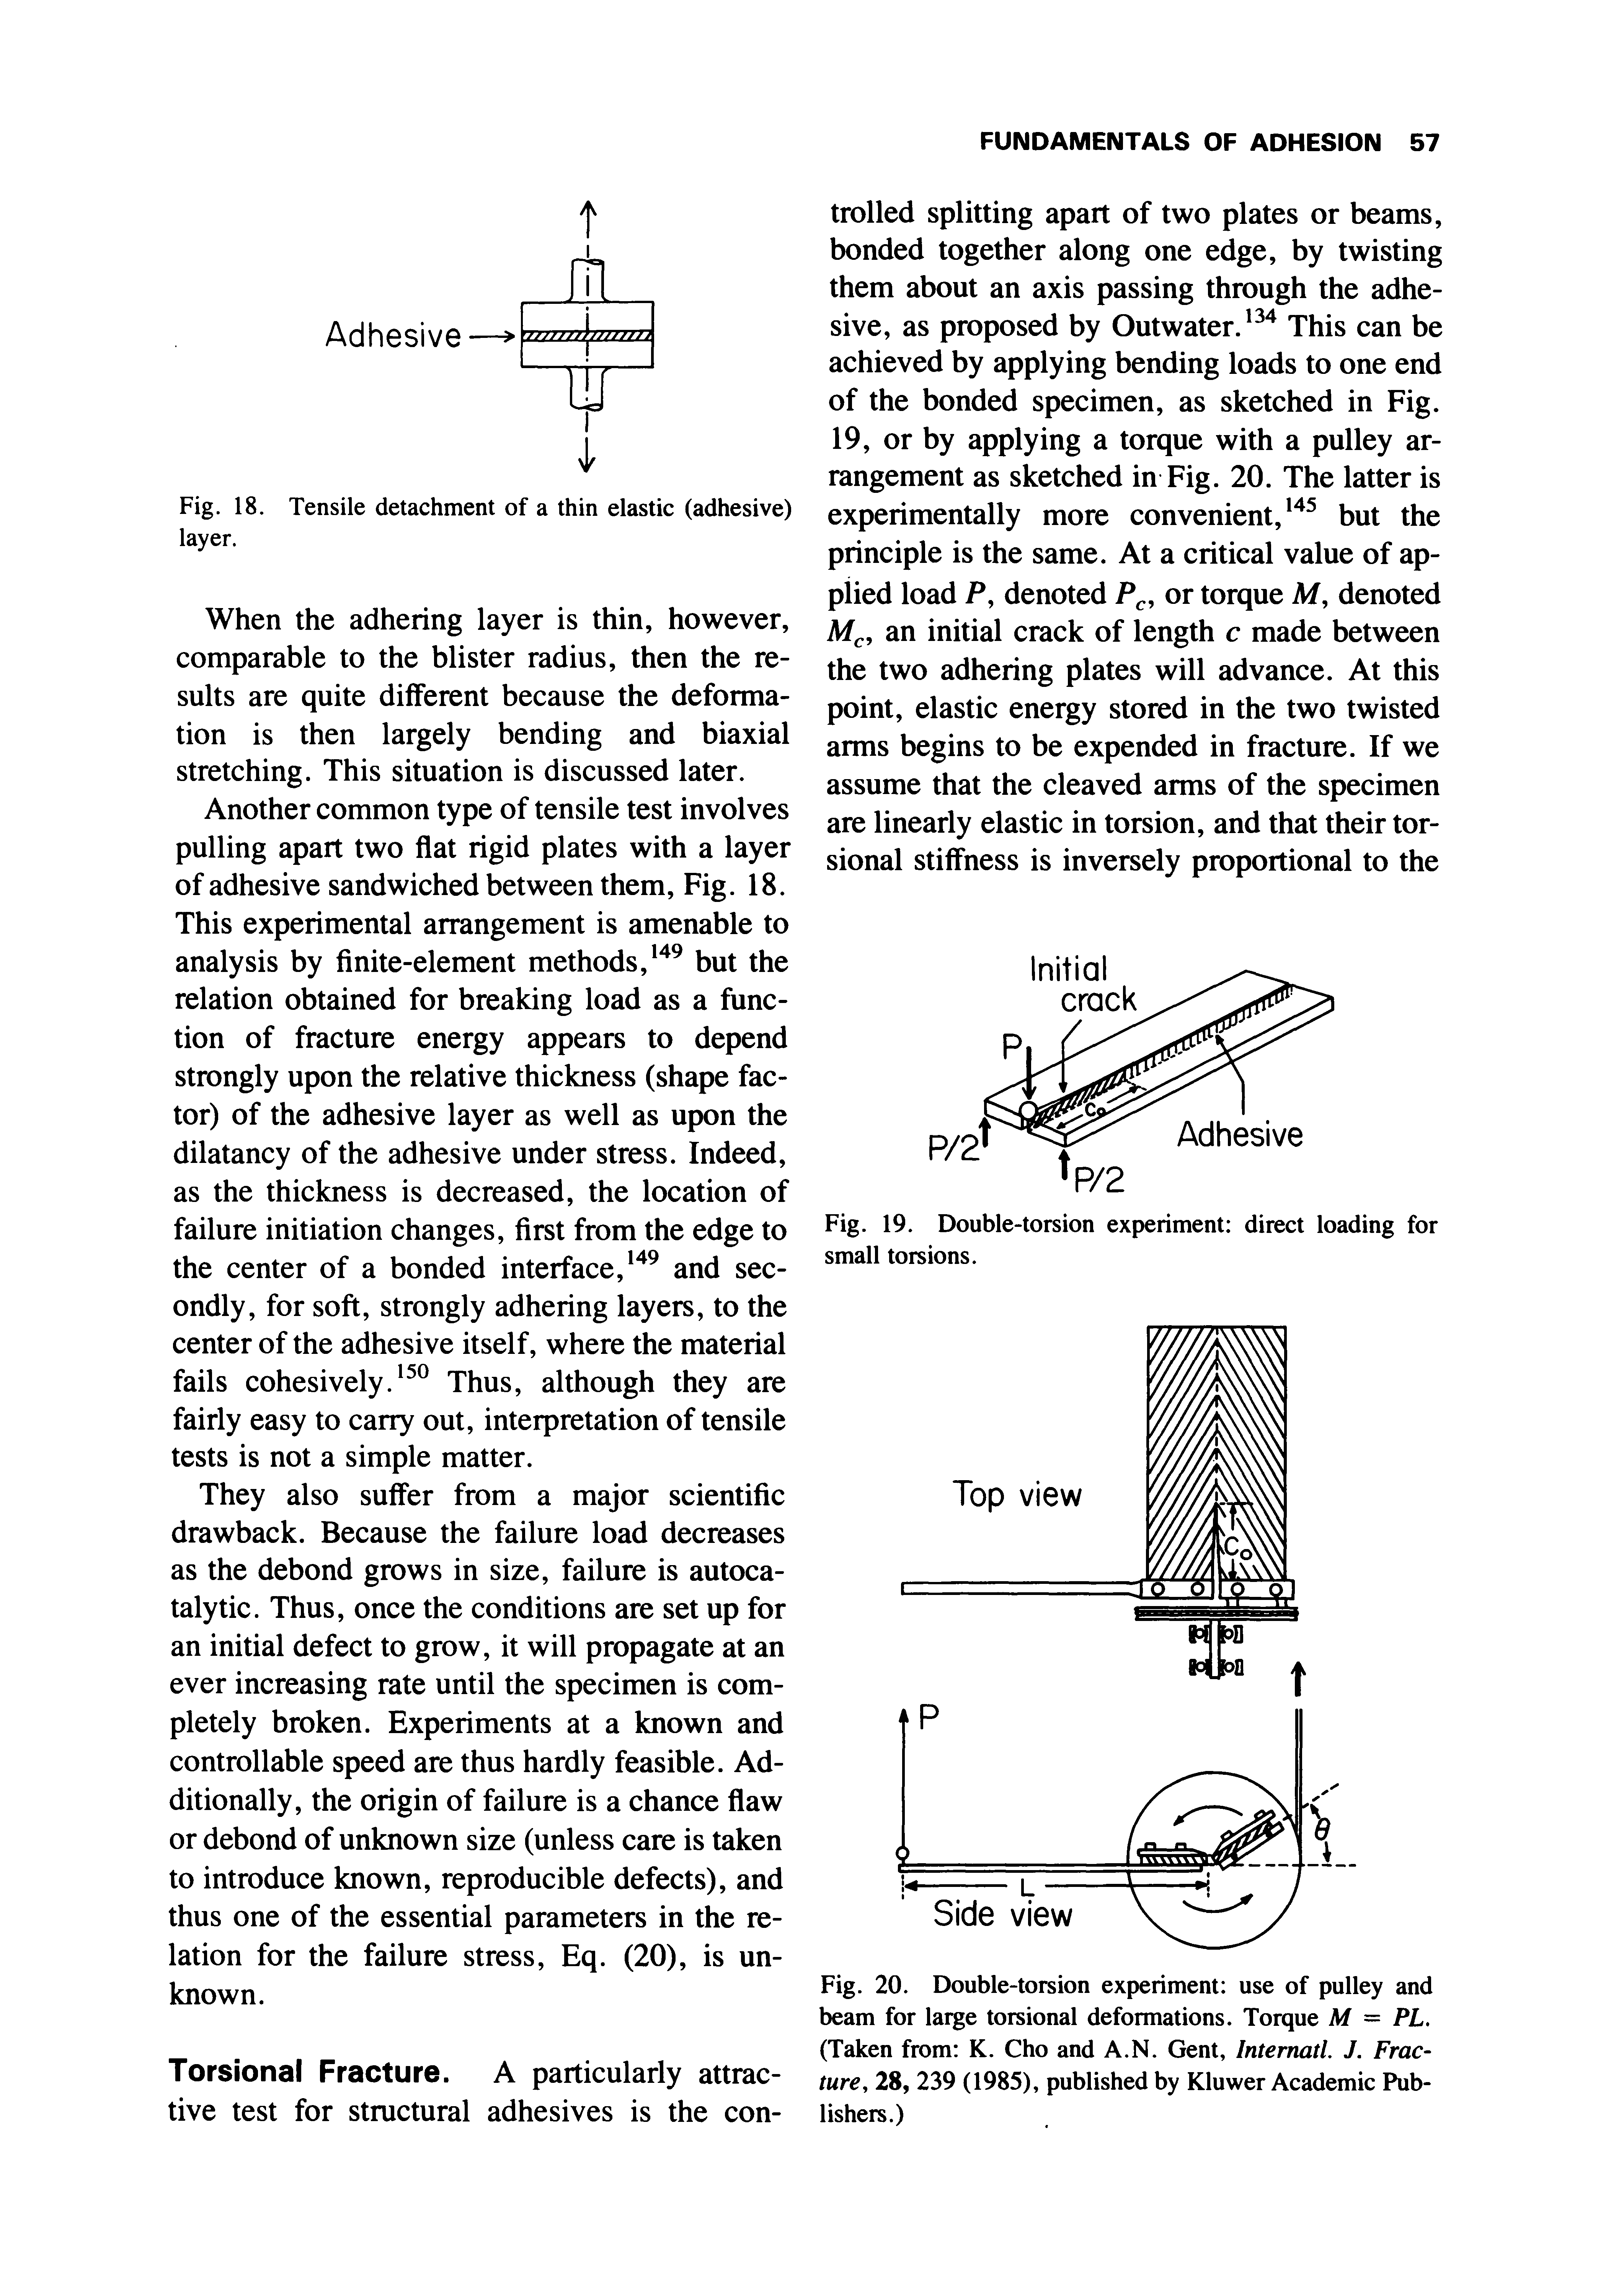 Fig. 20. Double-torsion experiment use of pulley and beam for large torsional deformations. Torque M = PL. (Taken from K. Cho and A.N. Gent, Intemati J. Fracture, 28, 239 (1985), published by Kluwer Academic Publishers.)...